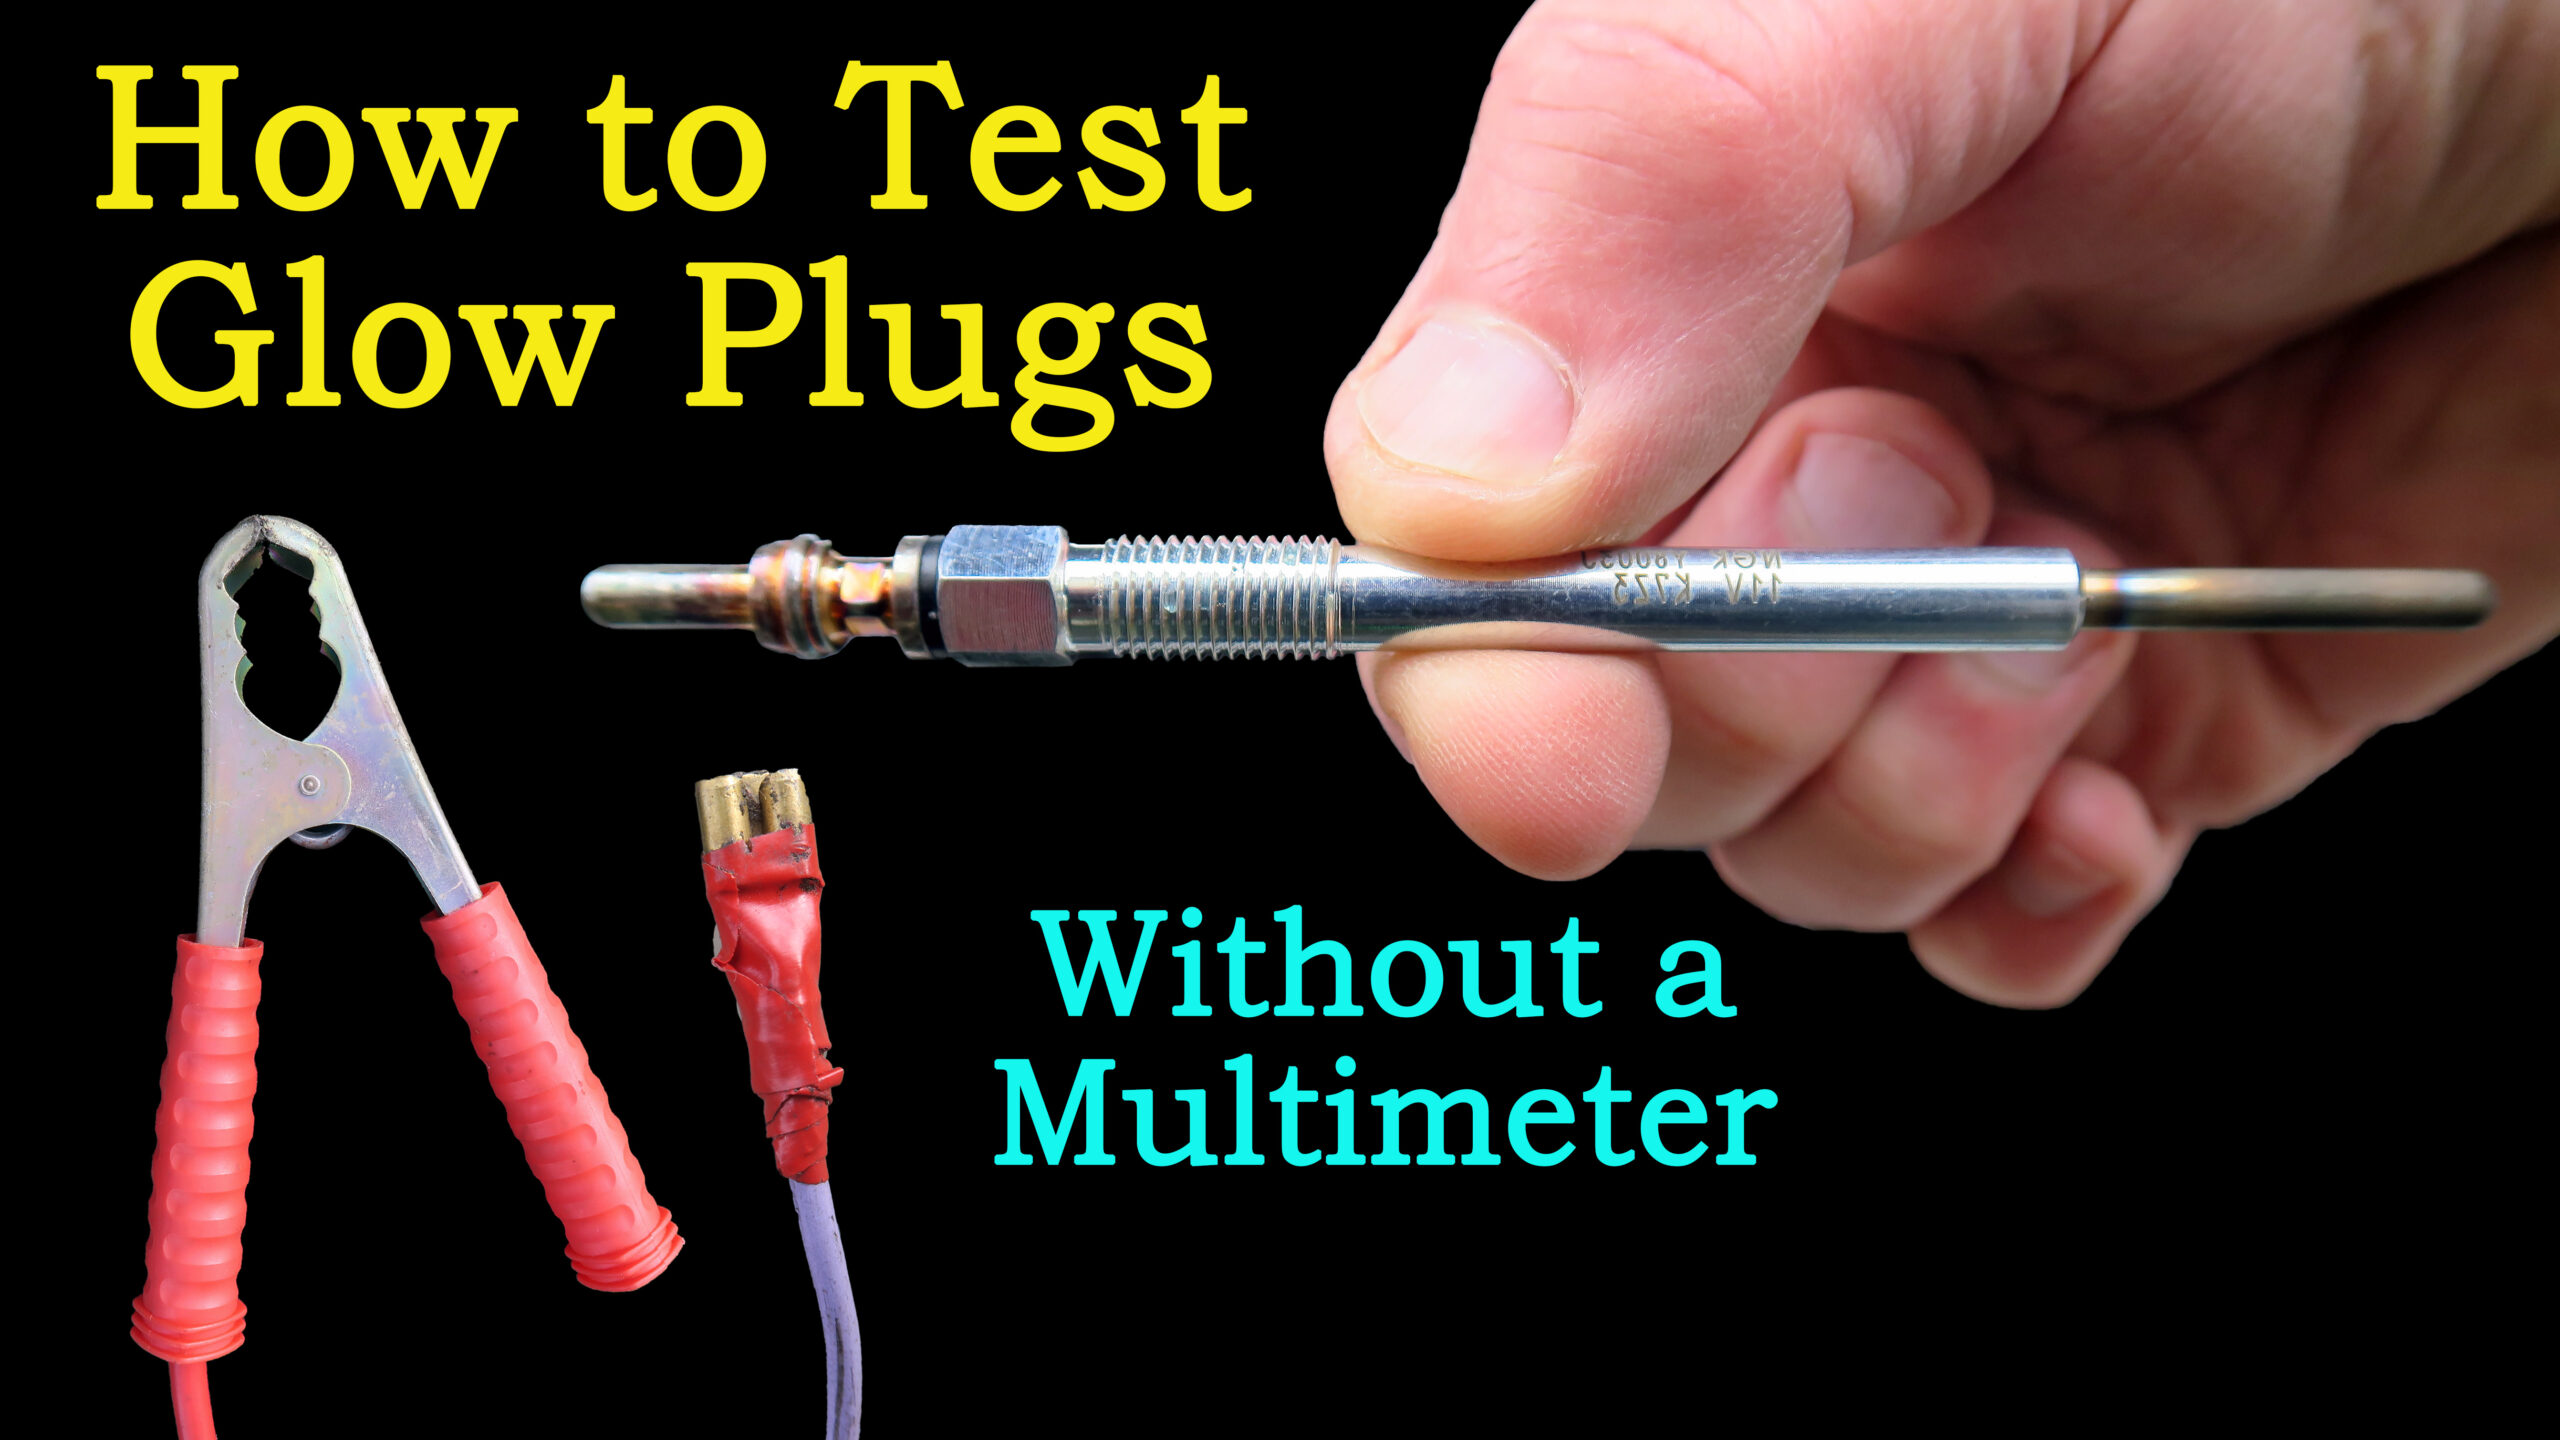 Test Glow Plugs From Start to Finish (Without a Multimeter)